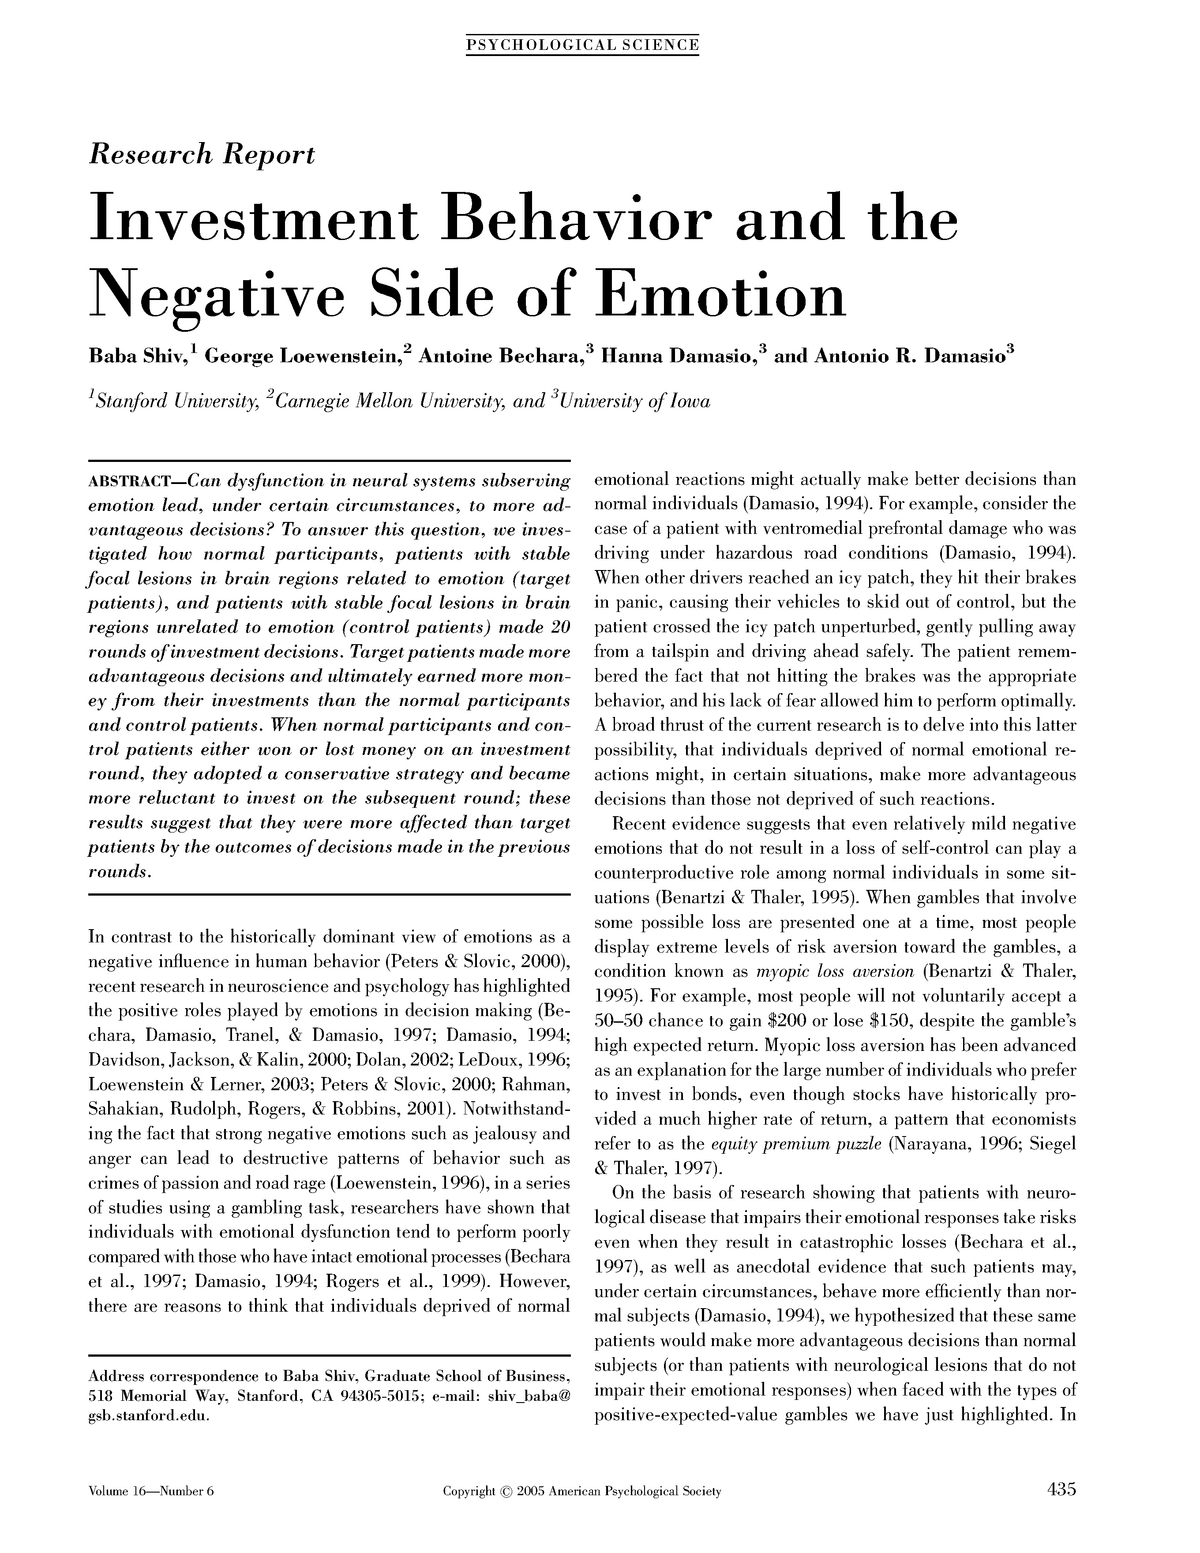 investment behaviour research papers pdf